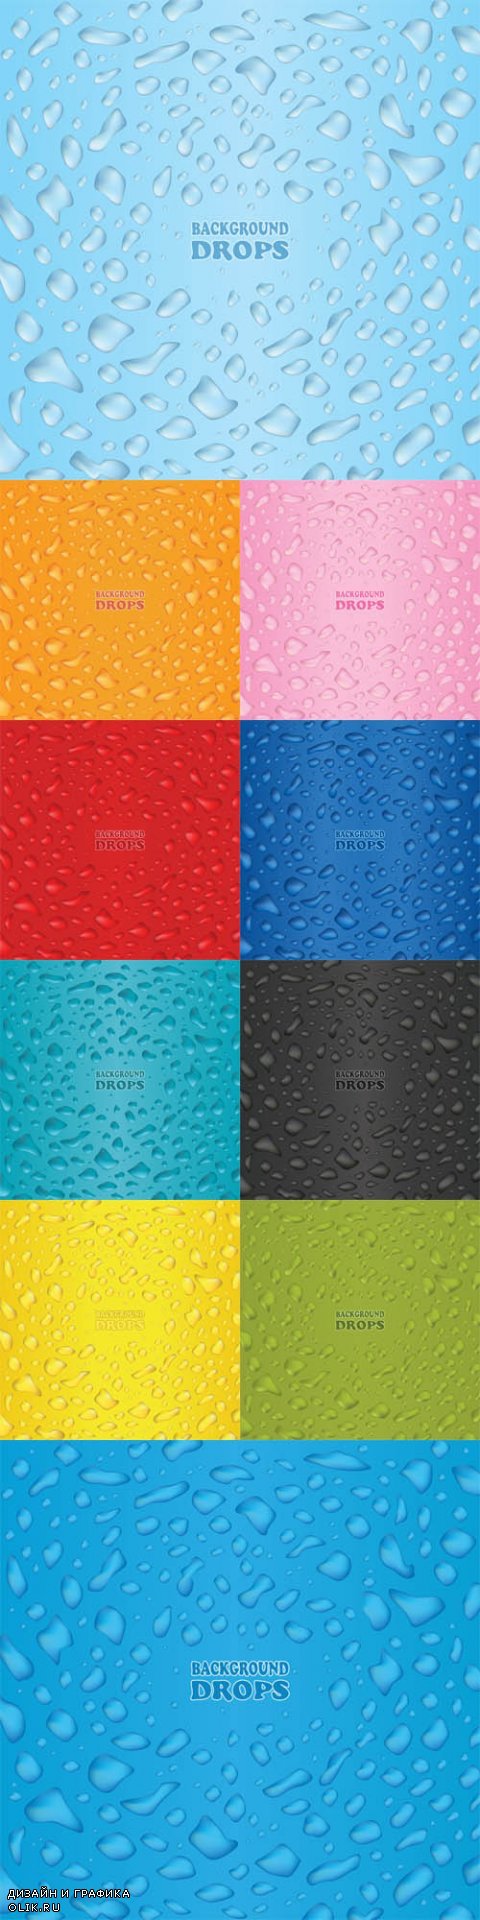 Vector Backgrounds of Water Drops